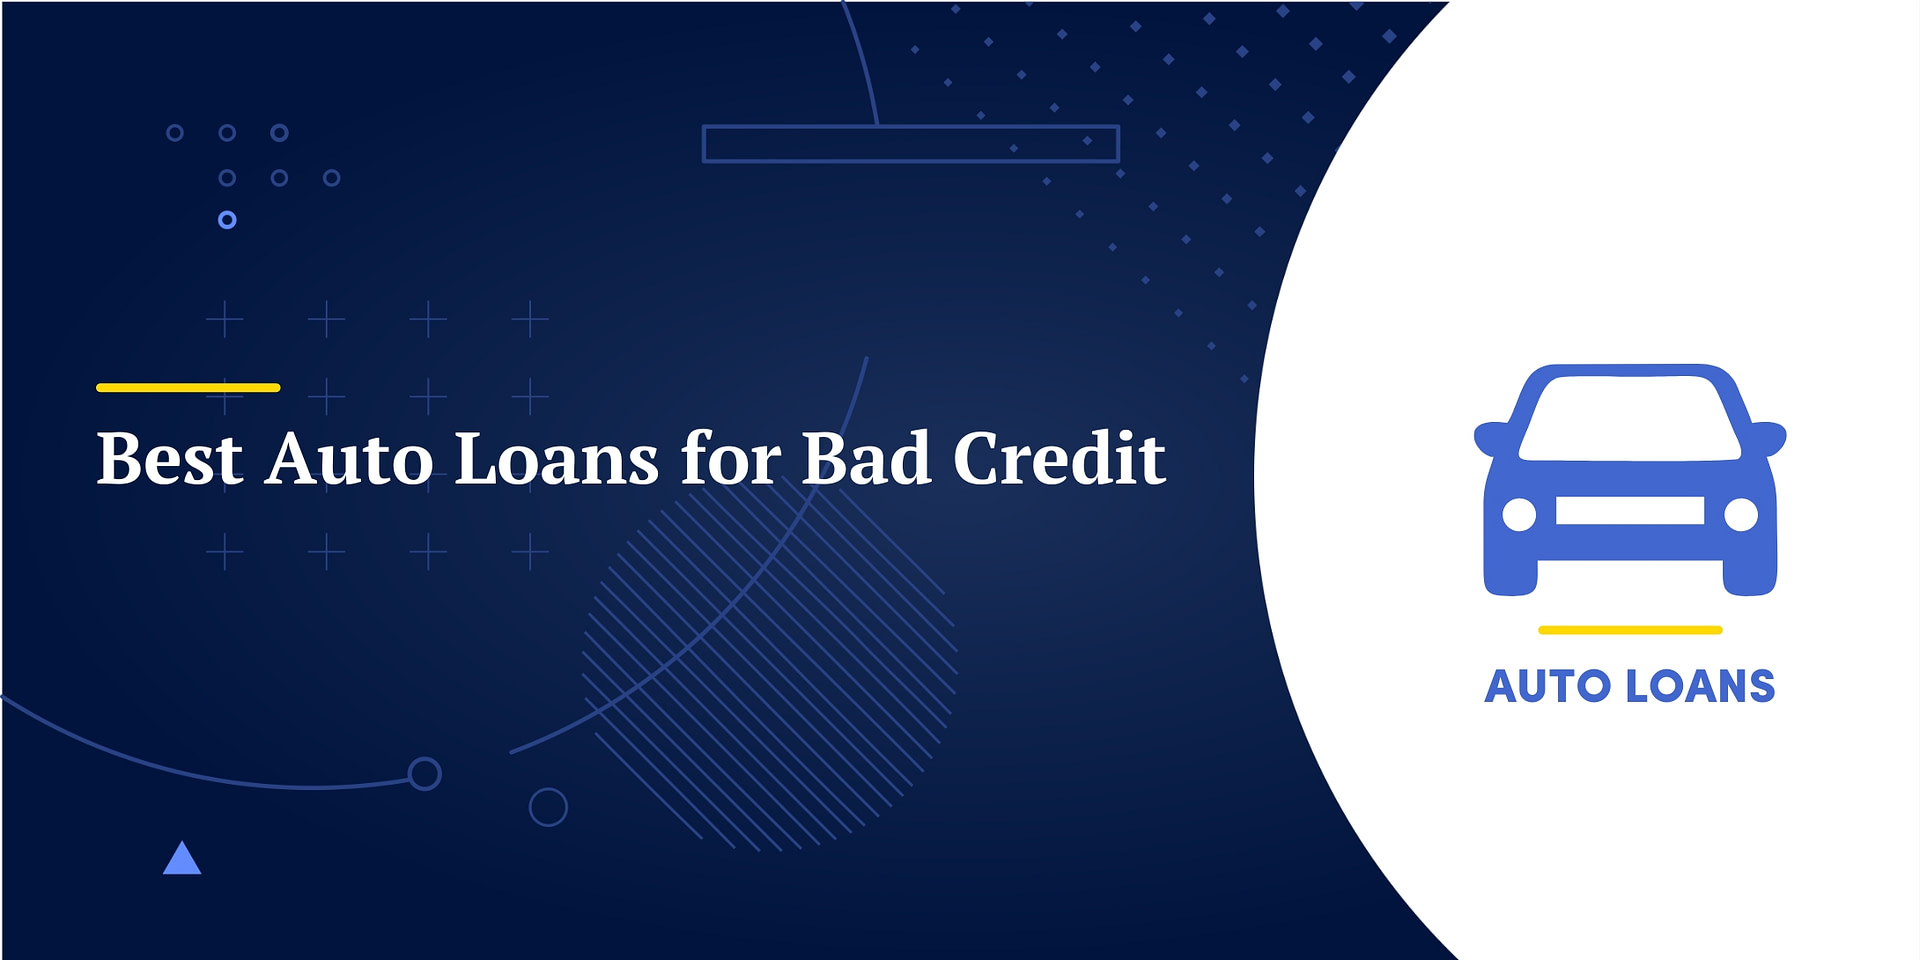 5 Best Auto Loans for Bad Credit (December 2022)